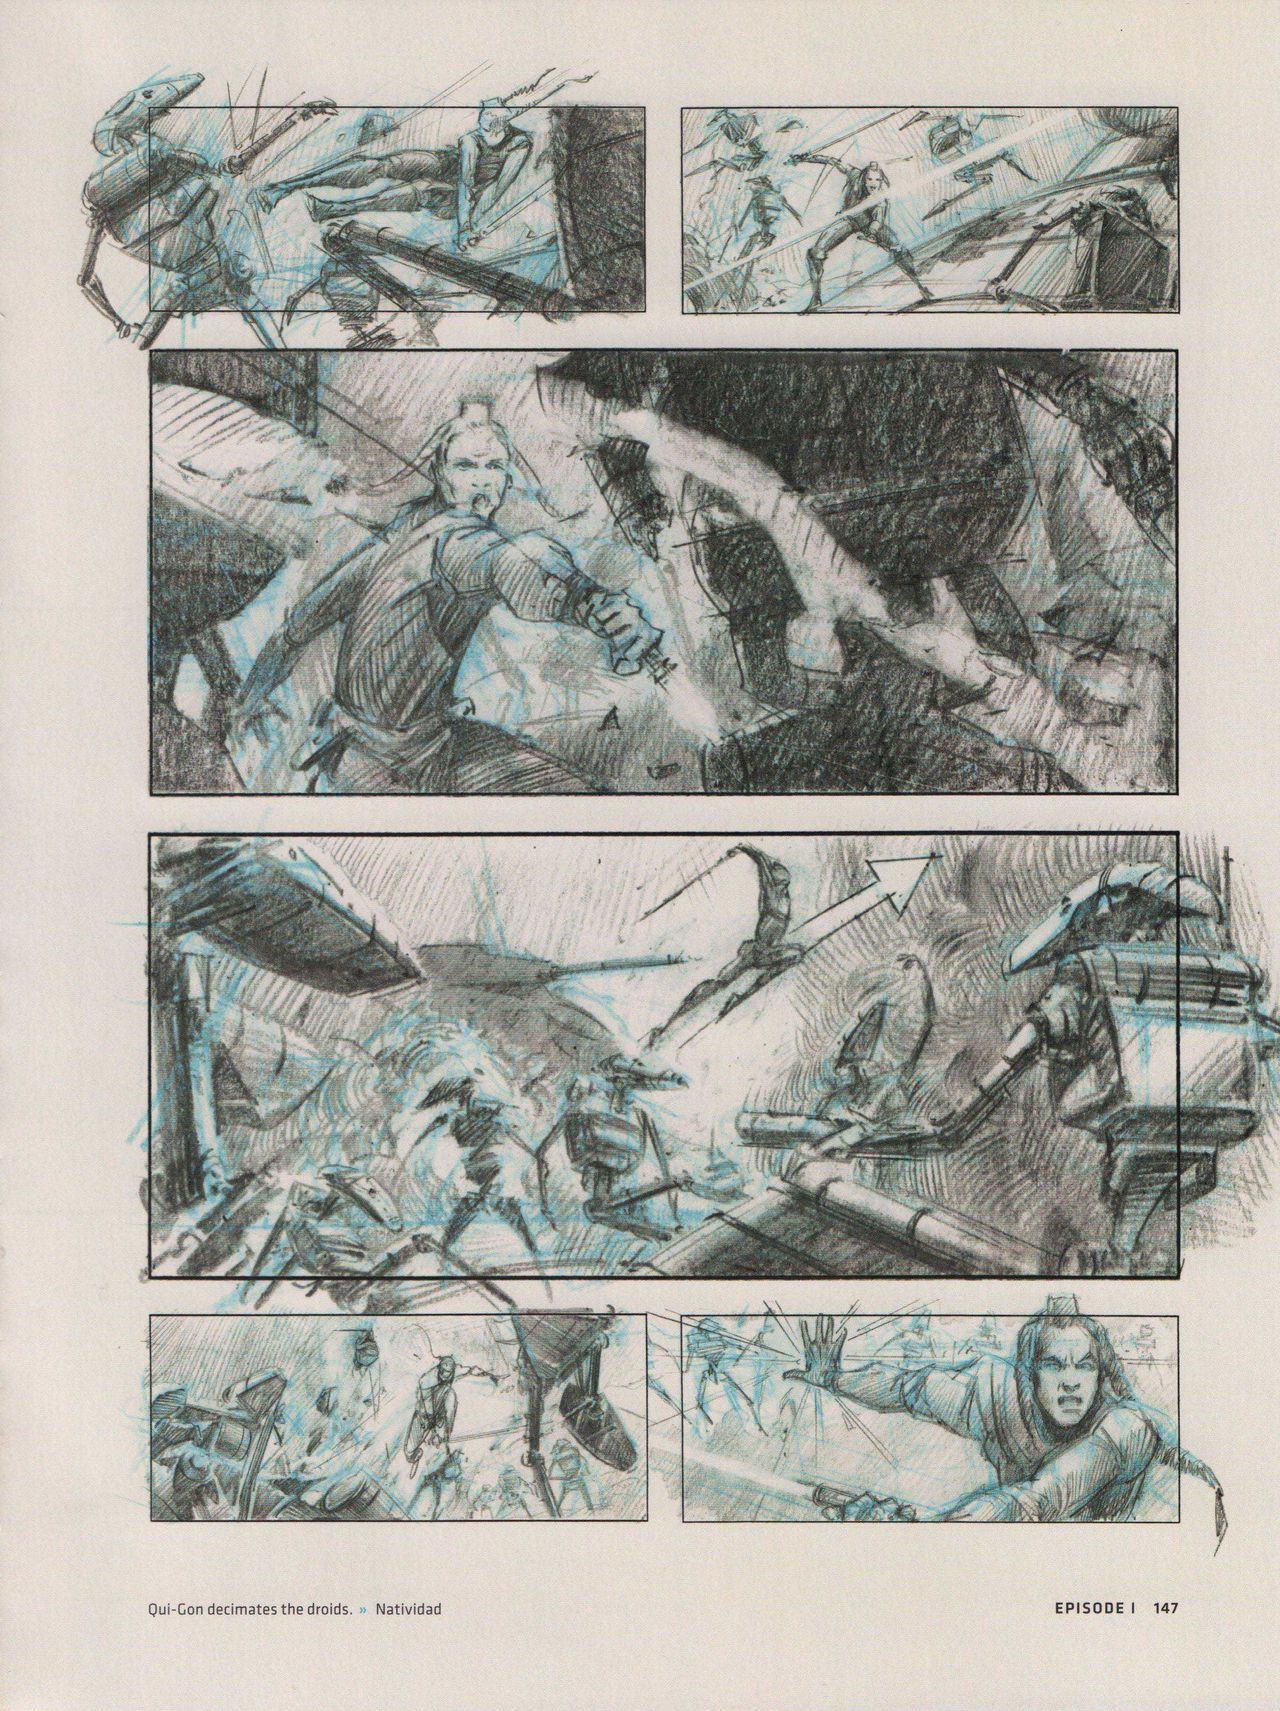 Star Wars Storyboards - The Prequel Trilogy 151